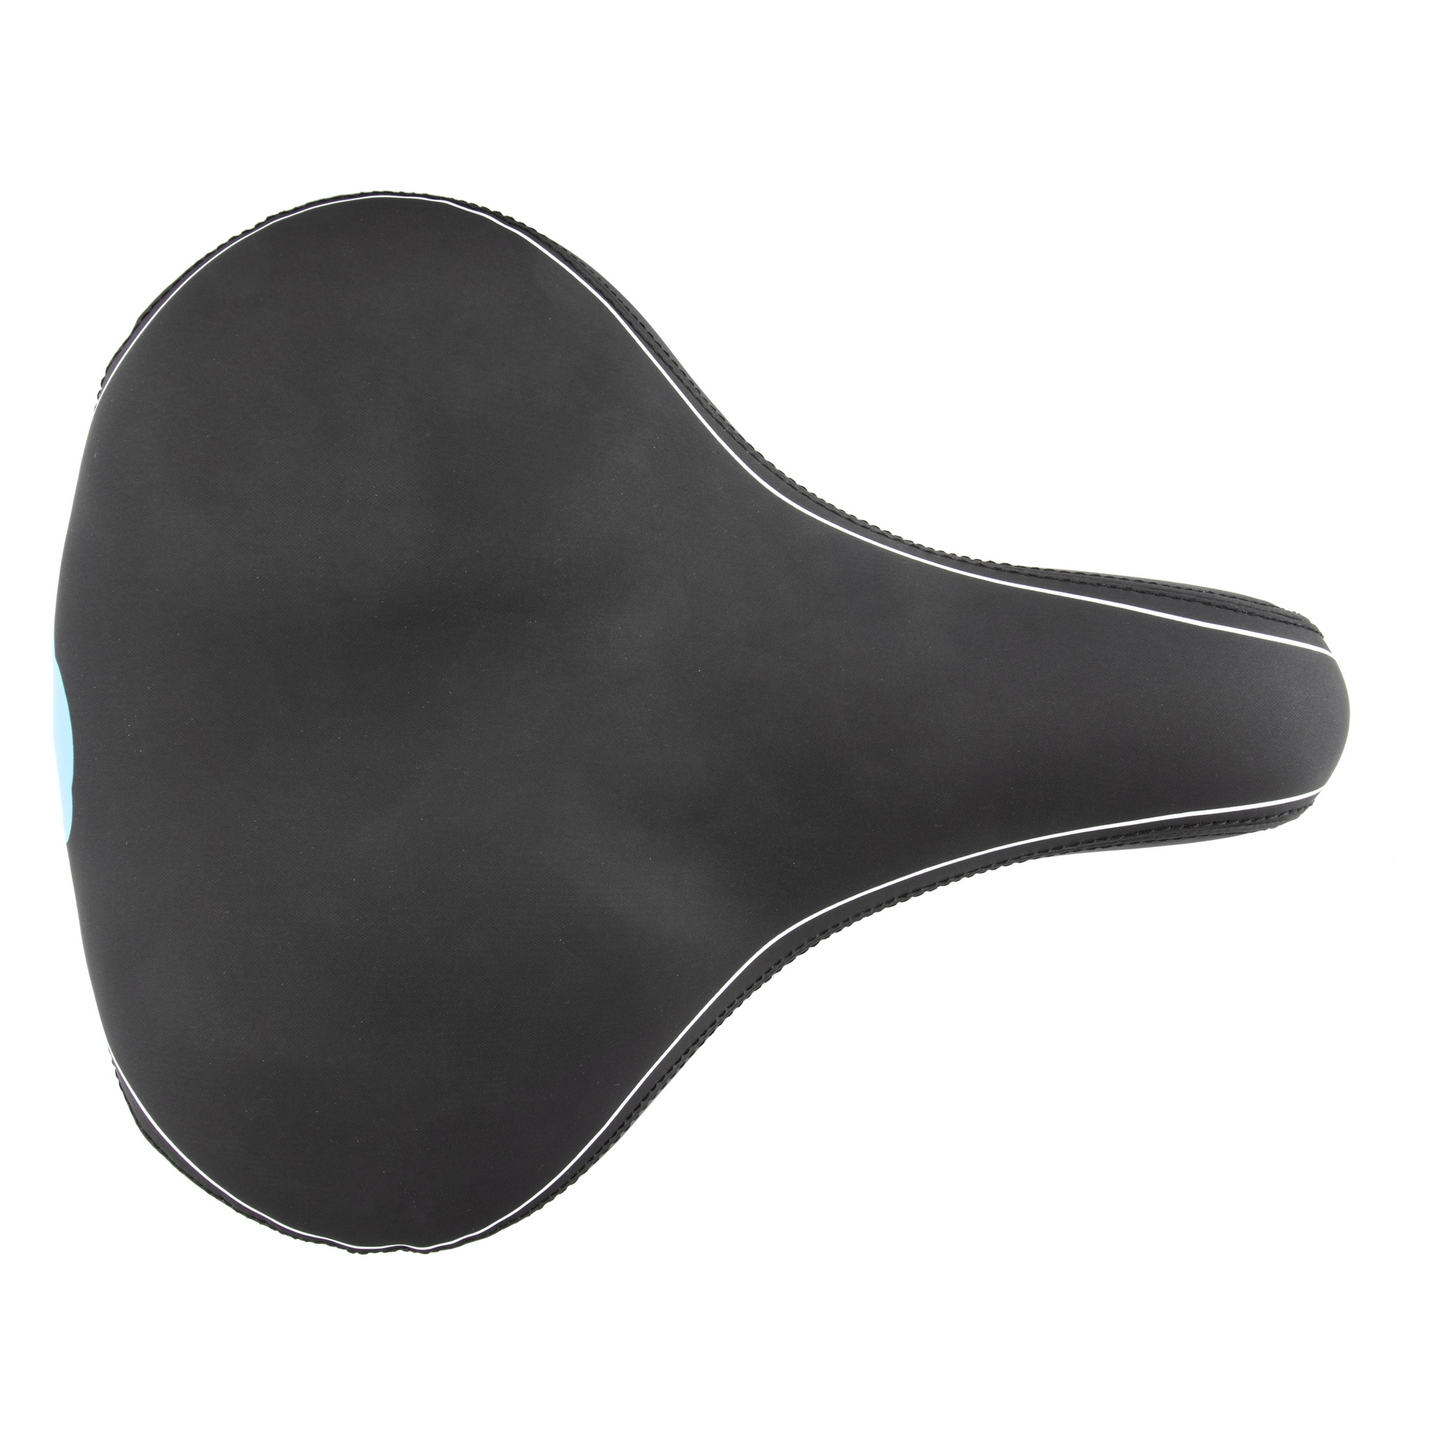 A black CLOUD-9 Cruiser Select bicycle seat with a blue trim, featuring an Anatomic relief design and Soft Touch Vinyl cover.